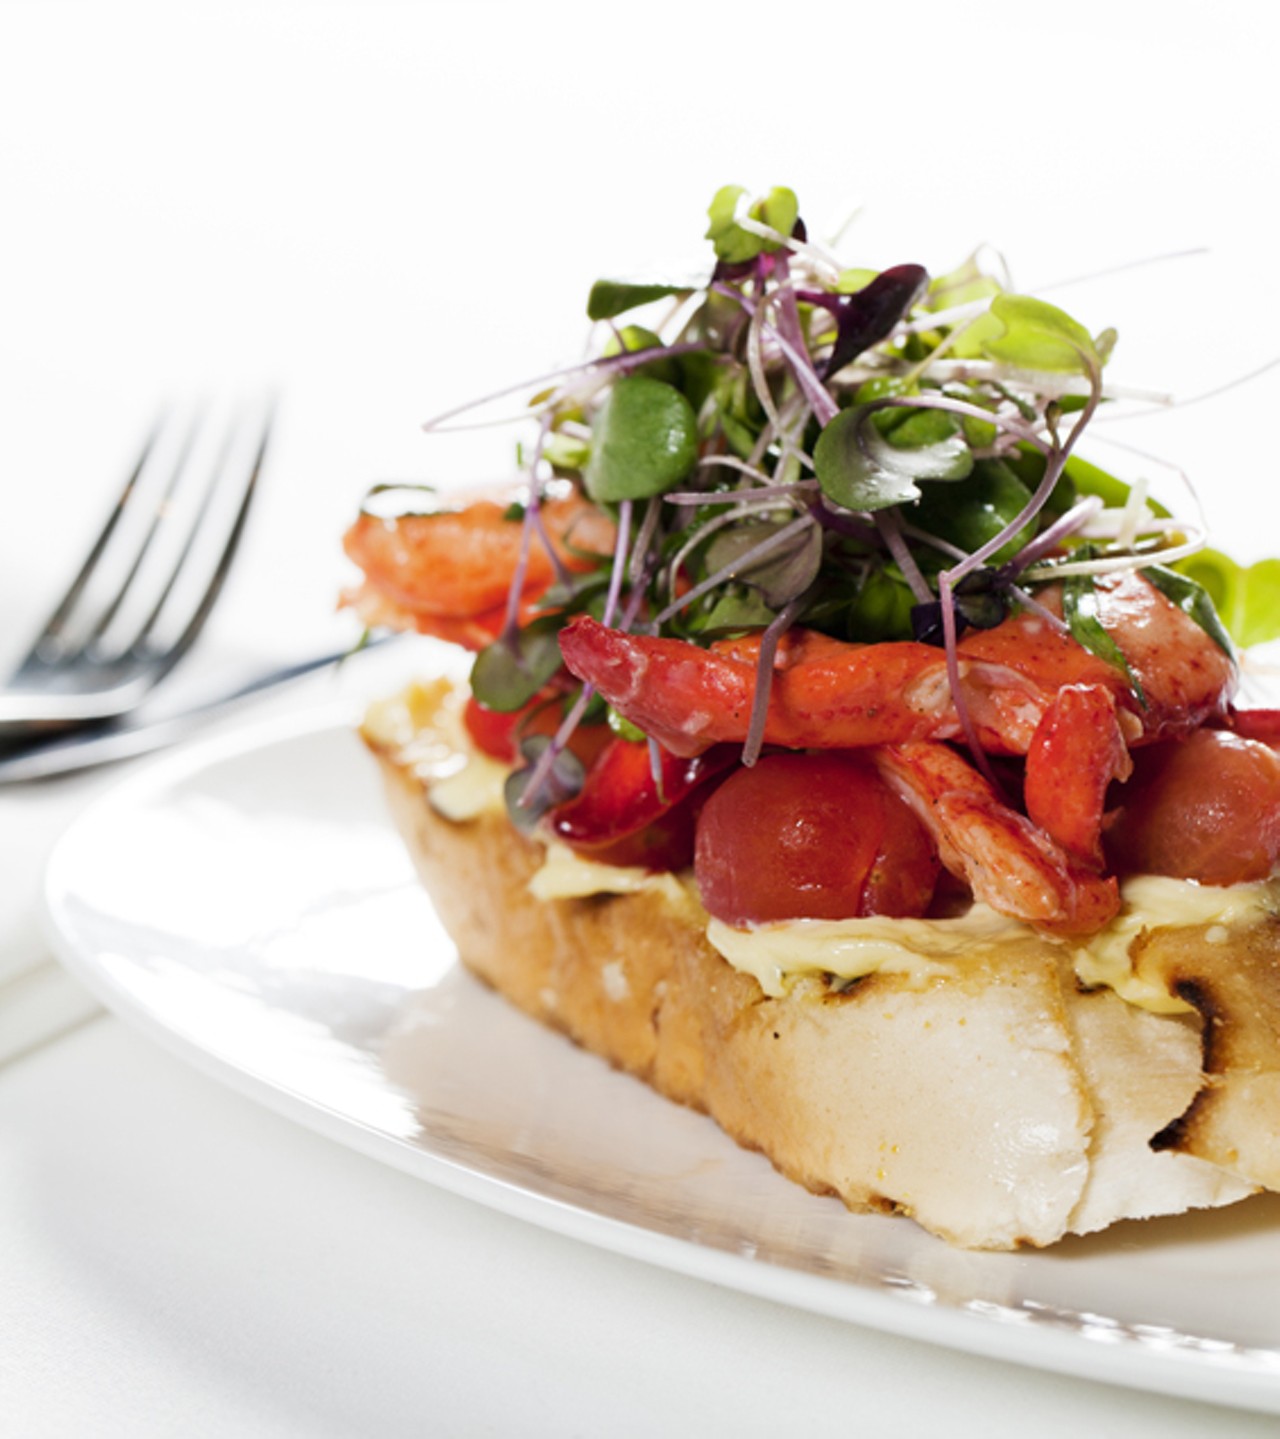 From the "to start" menu is the lobster "knuckle sandwich" with tarragon and tomatoes.